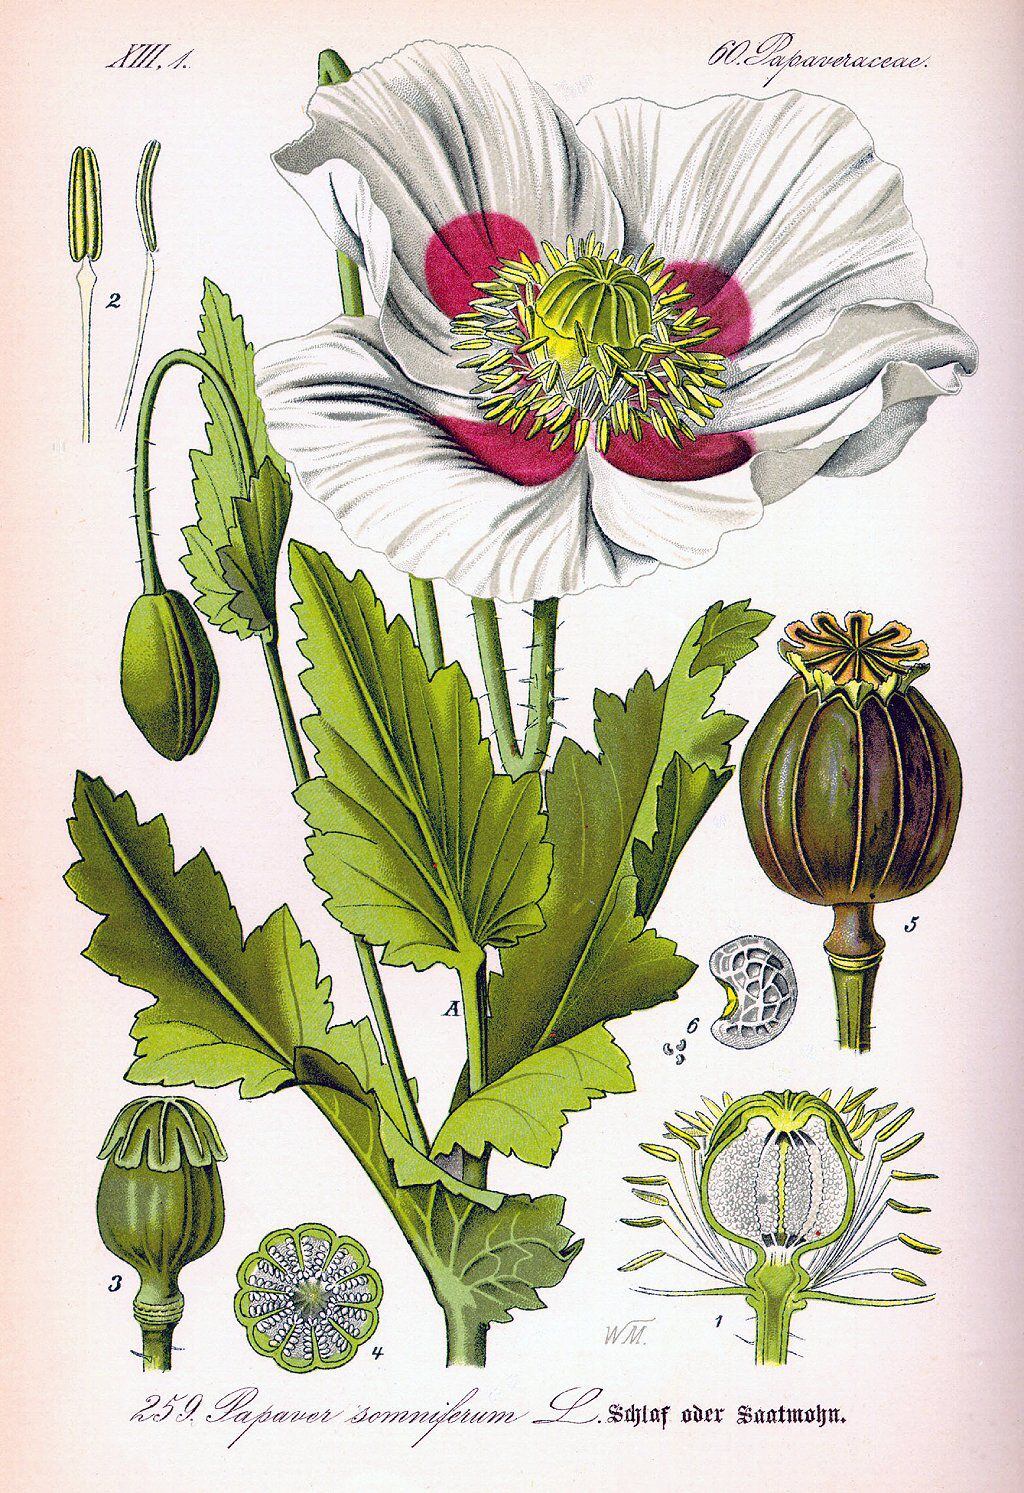 The opium poppy, Papaver somniferum, remains the source of many opiates.  Its botanical name in Latin means 